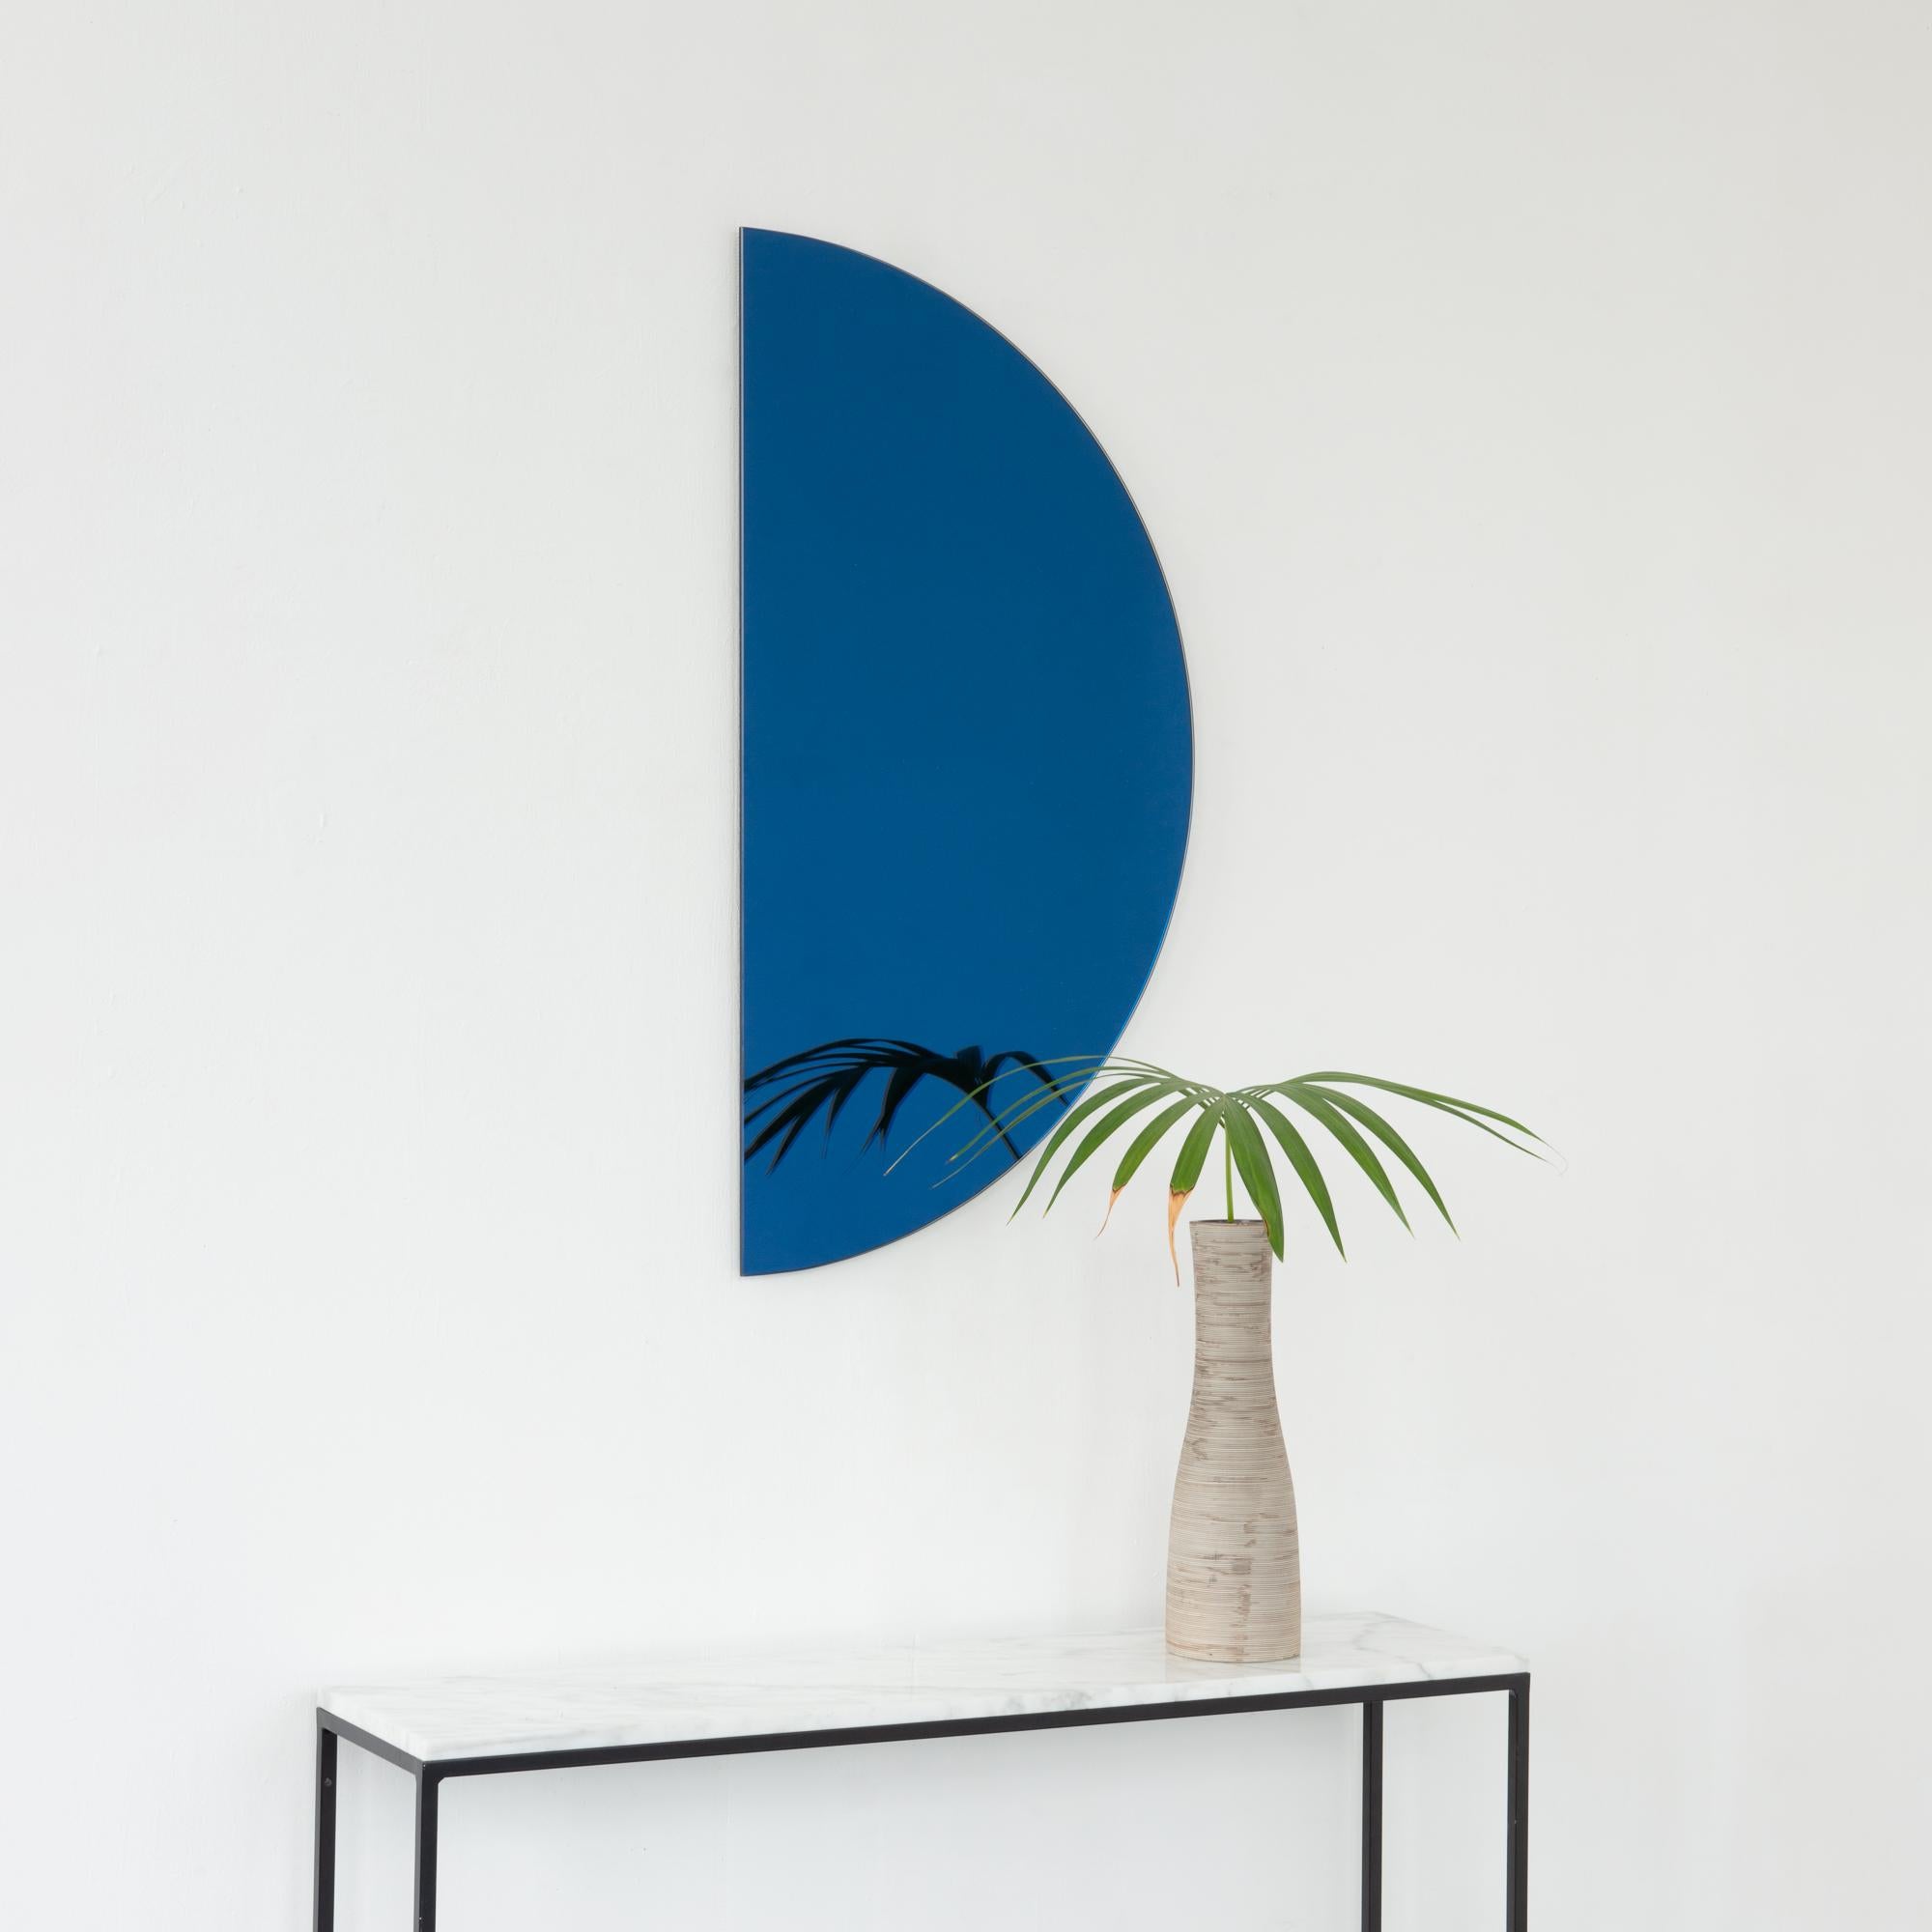 Minimalist half-moon Luna™ blue tinted frameless mirror with a floating effect. Fitted with a quality and ingenious hanging system for a flexible installation in 4 different directions. Designed and made in London, UK. 

Our mirrors are designed